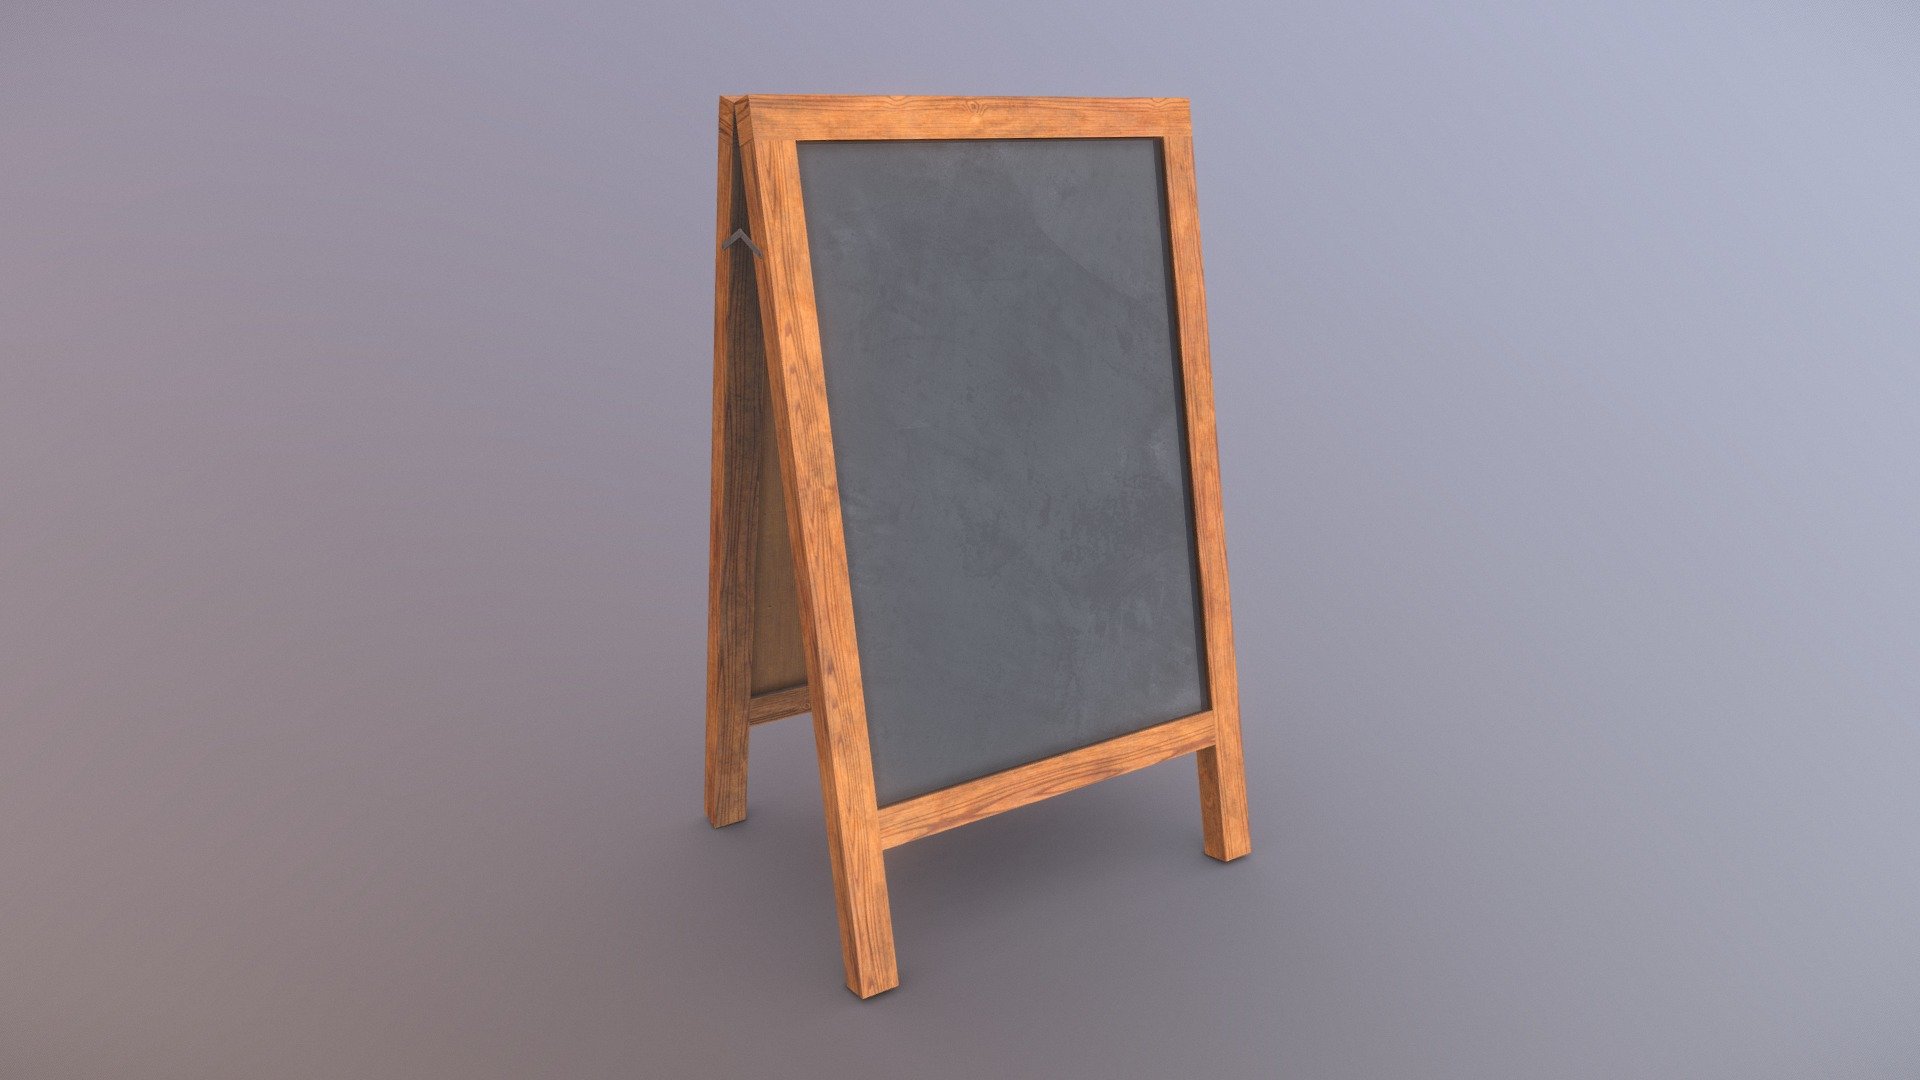 Restaurant Black Chalkboard Blackboard 4K PBR Game-Ready Free
If the model is useful to you and if you want, you can buy me a coffee:



ko-fi.com/parzivalcg
Available formats:


FBX
OBJ
DAE
ABC

Textures:


4K PBR 16-bit png format

Youtube video:
https://www.youtube.com/watch?v=BTKT1zYDqqE

You can buy a set of Restaurant Chalkboards that includes:


4 Models (Small Open, Small Closed, Big Open, Big Closed)
4 Sets of textures (Green/Black Board &amp; Ambar/Red Wood)
Link: 

Royalty Free License (See Sketchfab Terms and Conditions). The model can be used in any type of project. Reselling the model, modified meshes or texture in any form is not allowed 3d model